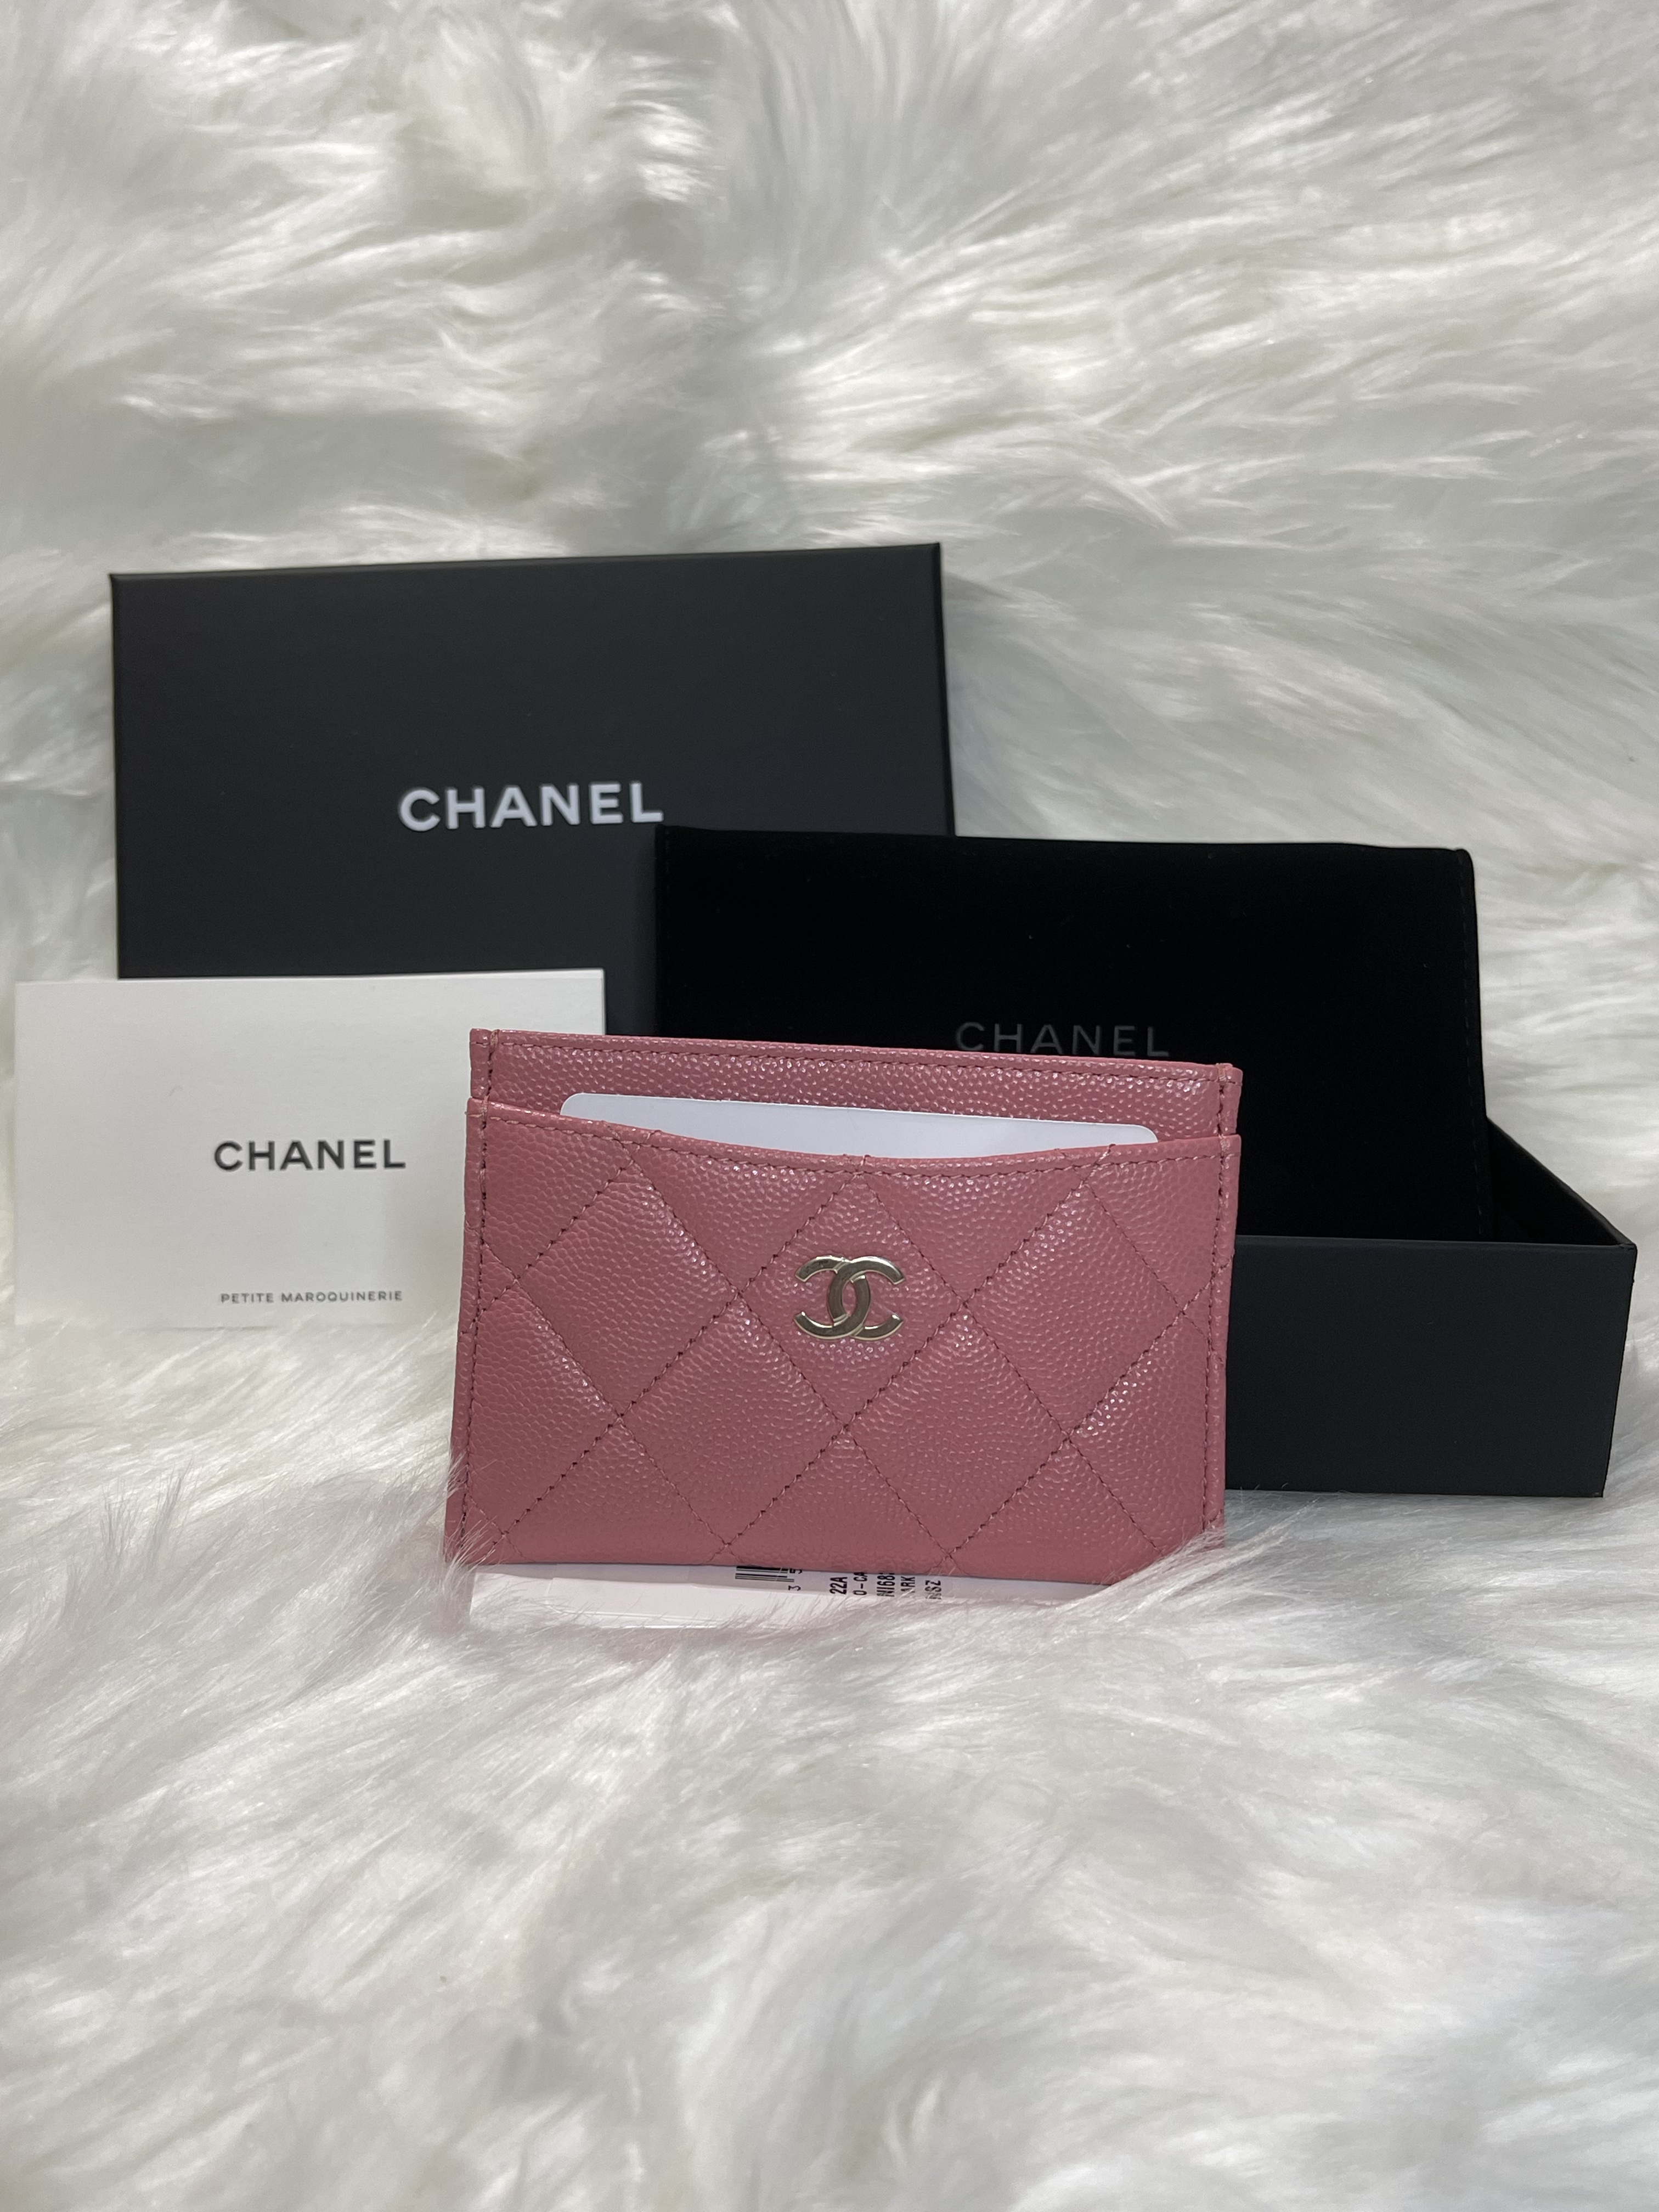 Introduction to Chanel's Small Leather Goods